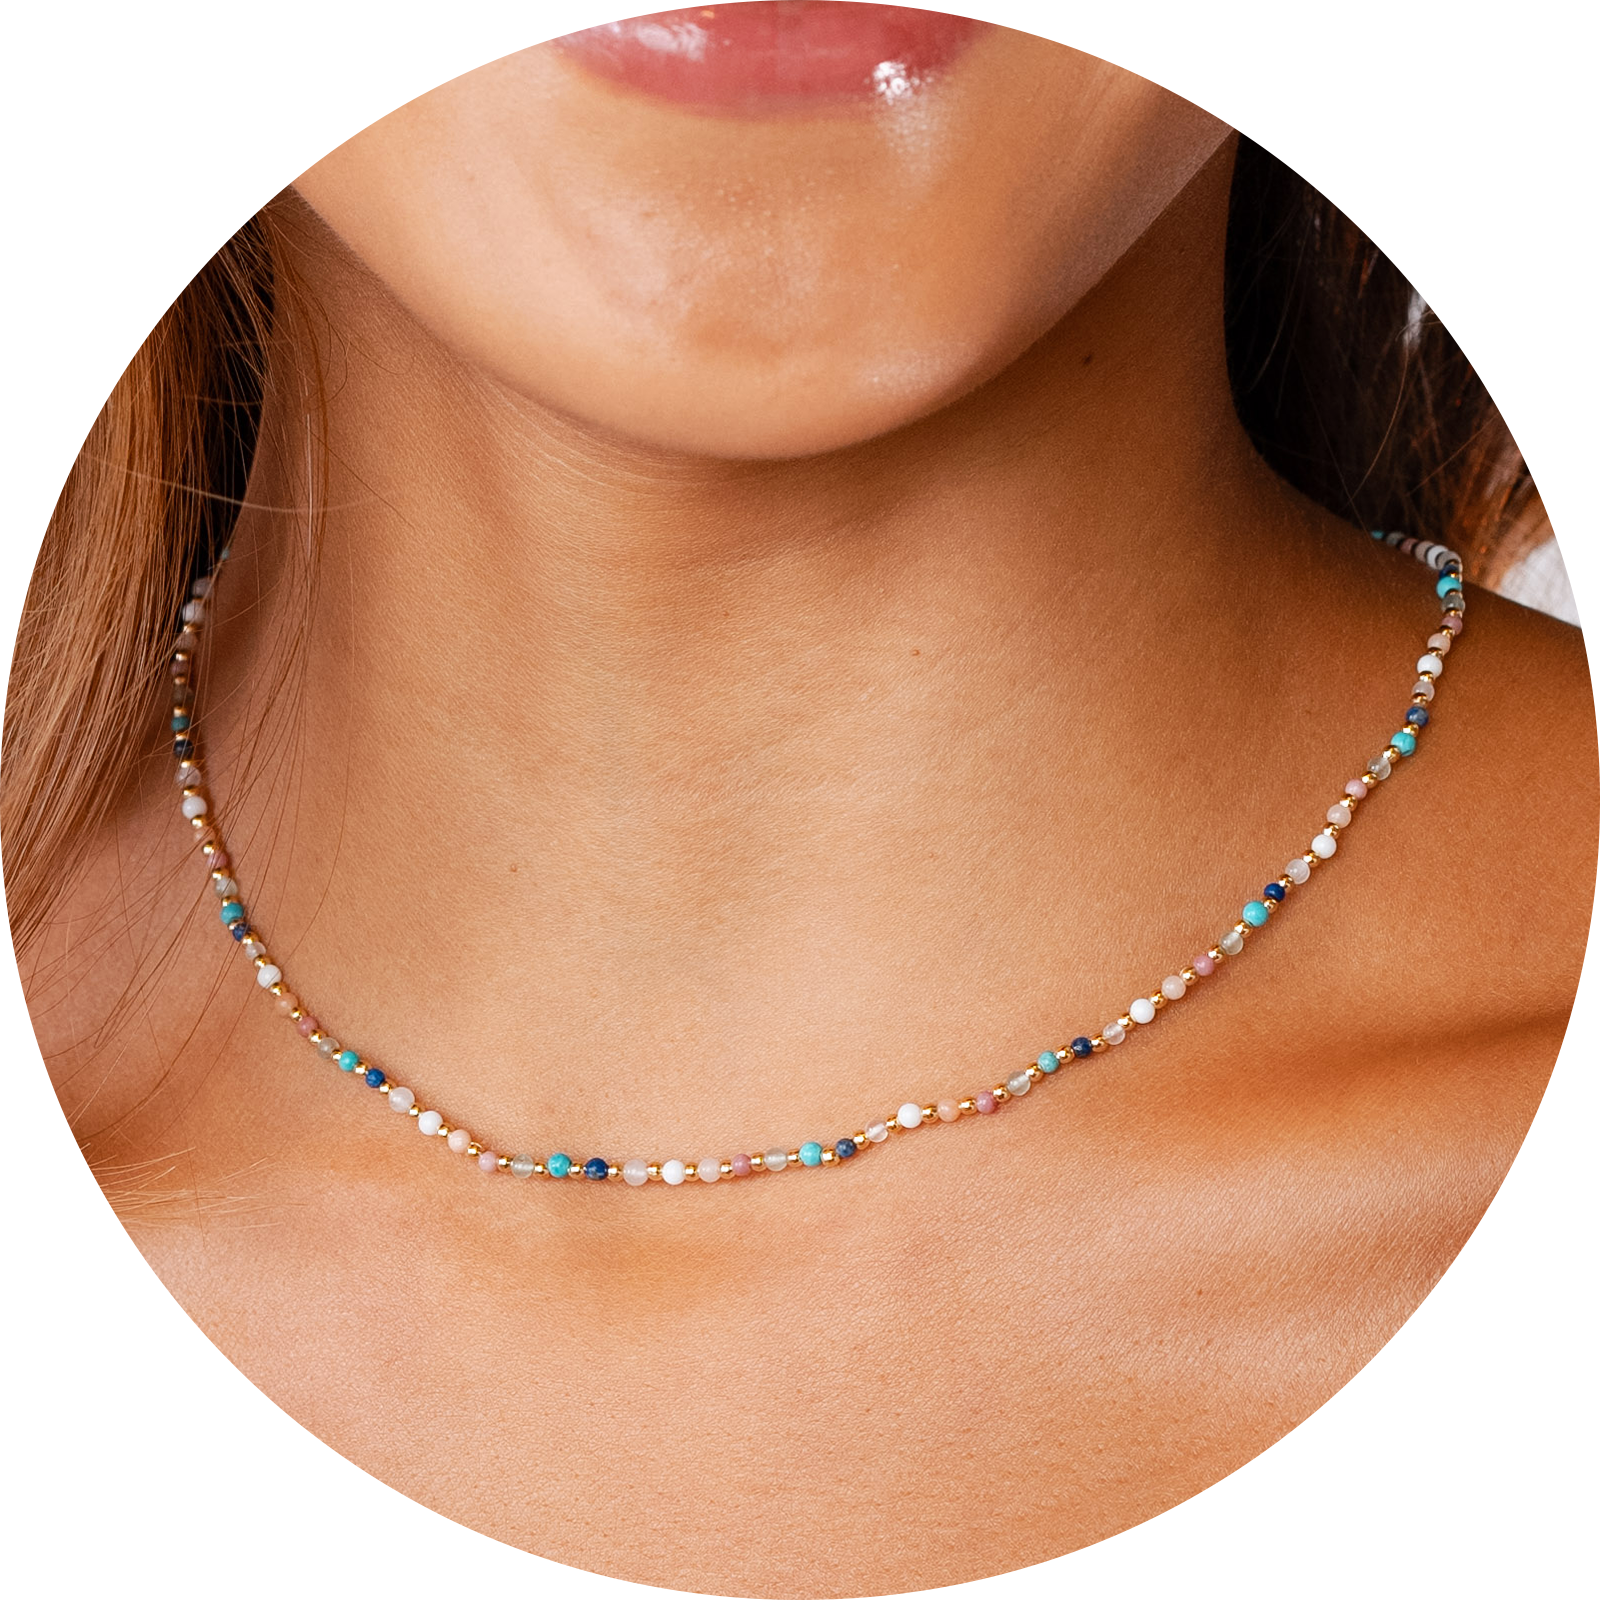 Model wearing a 2mm multicolor stone and gold bead healing necklace